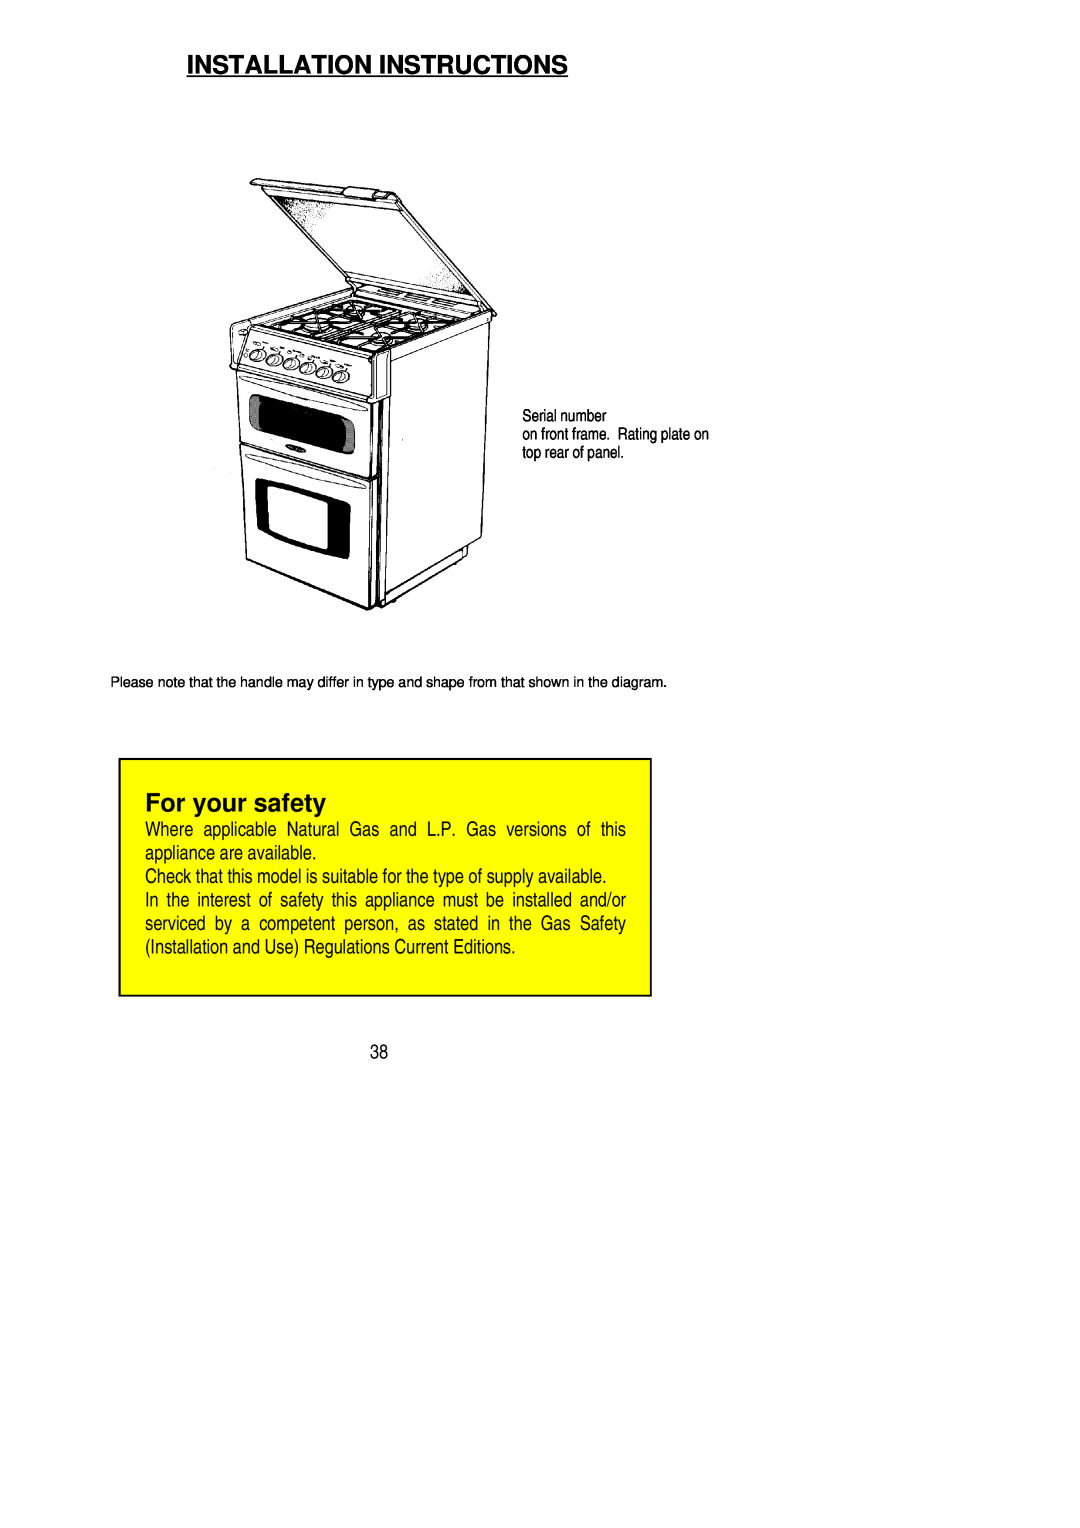 Electrolux SIG 501 installation instructions Installation Instructions, For your safety 